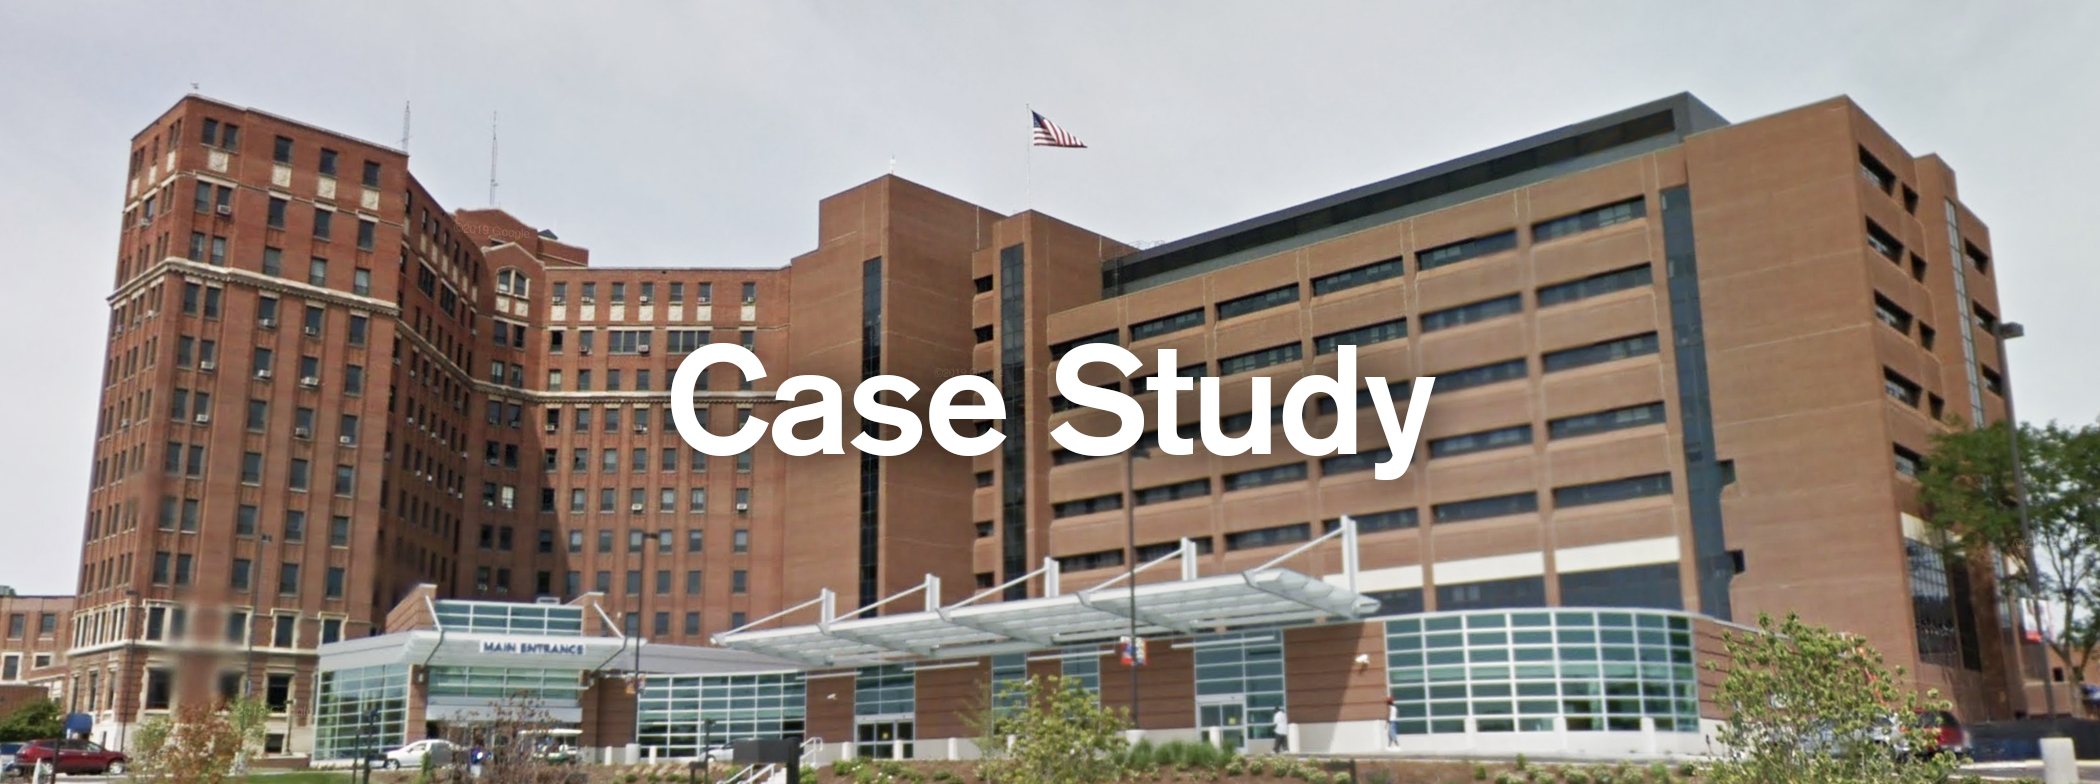 How High Density Storage helped the Hurley Medical Center